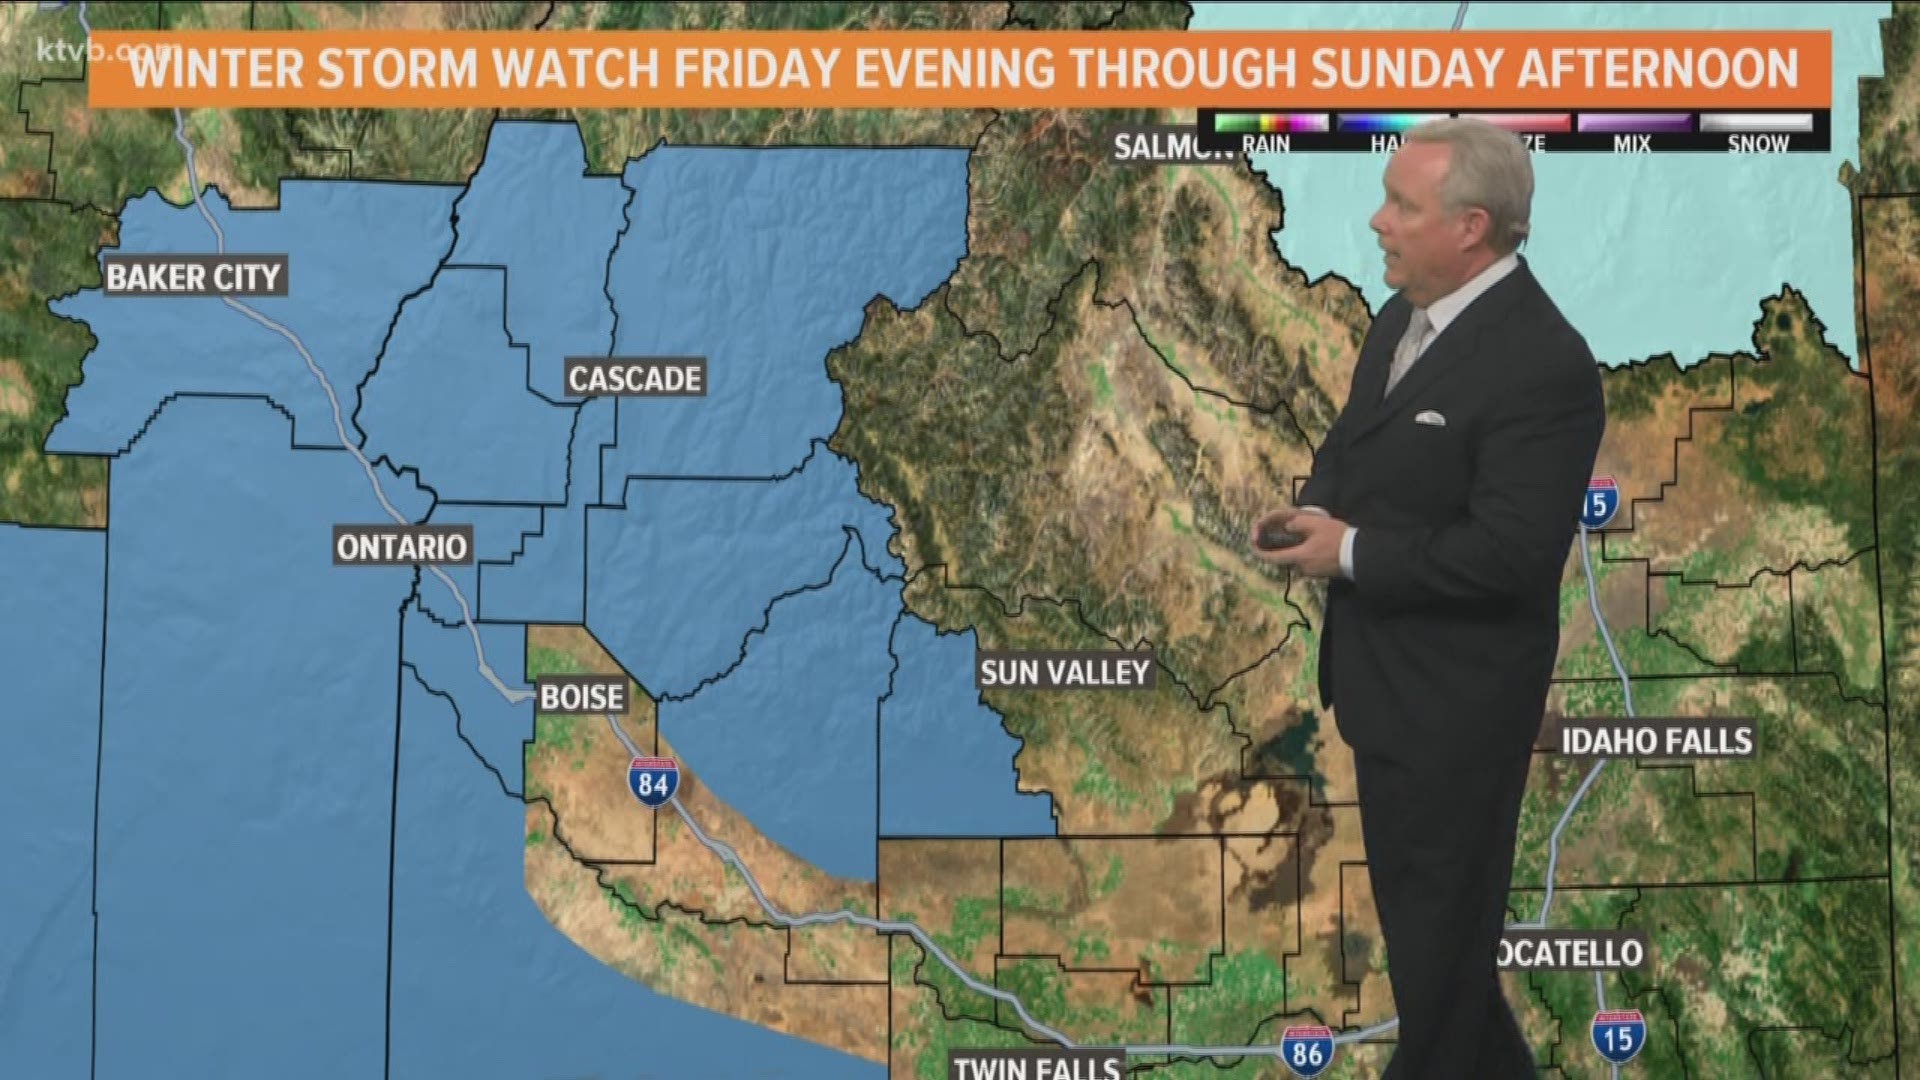 Idaho's Chief Meteorologist Rick Lantz says heavy snow is expected in the mountains, with around a foot in some areas.